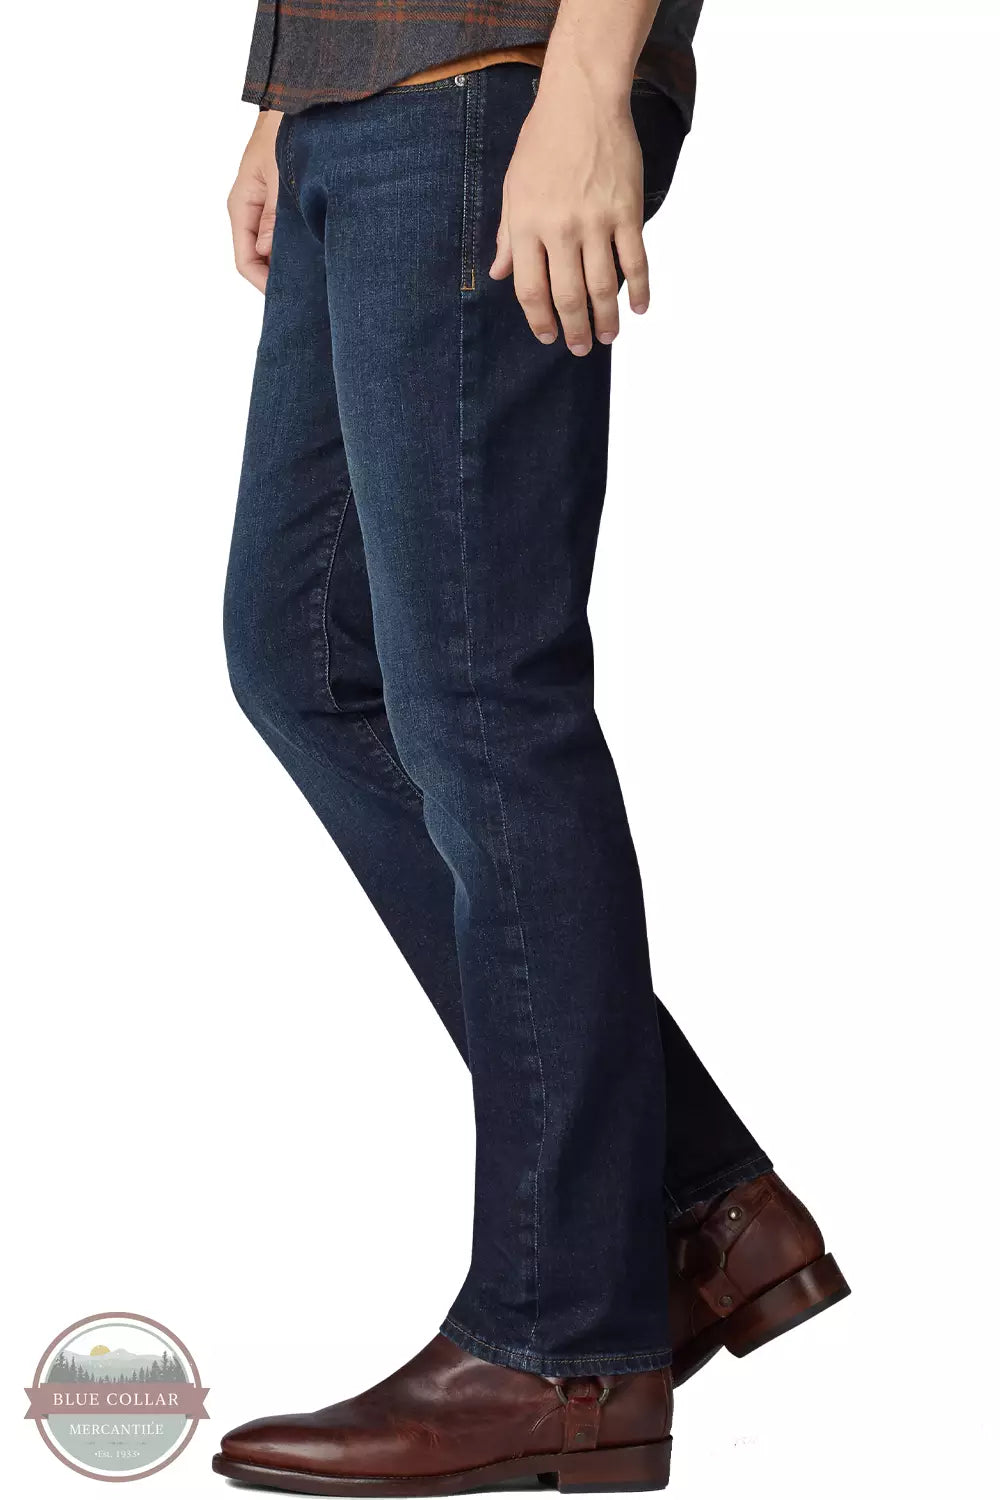 Lee 2105051 Men's Extreme Motion Straight Fit Tapered Leg Jeans Side View